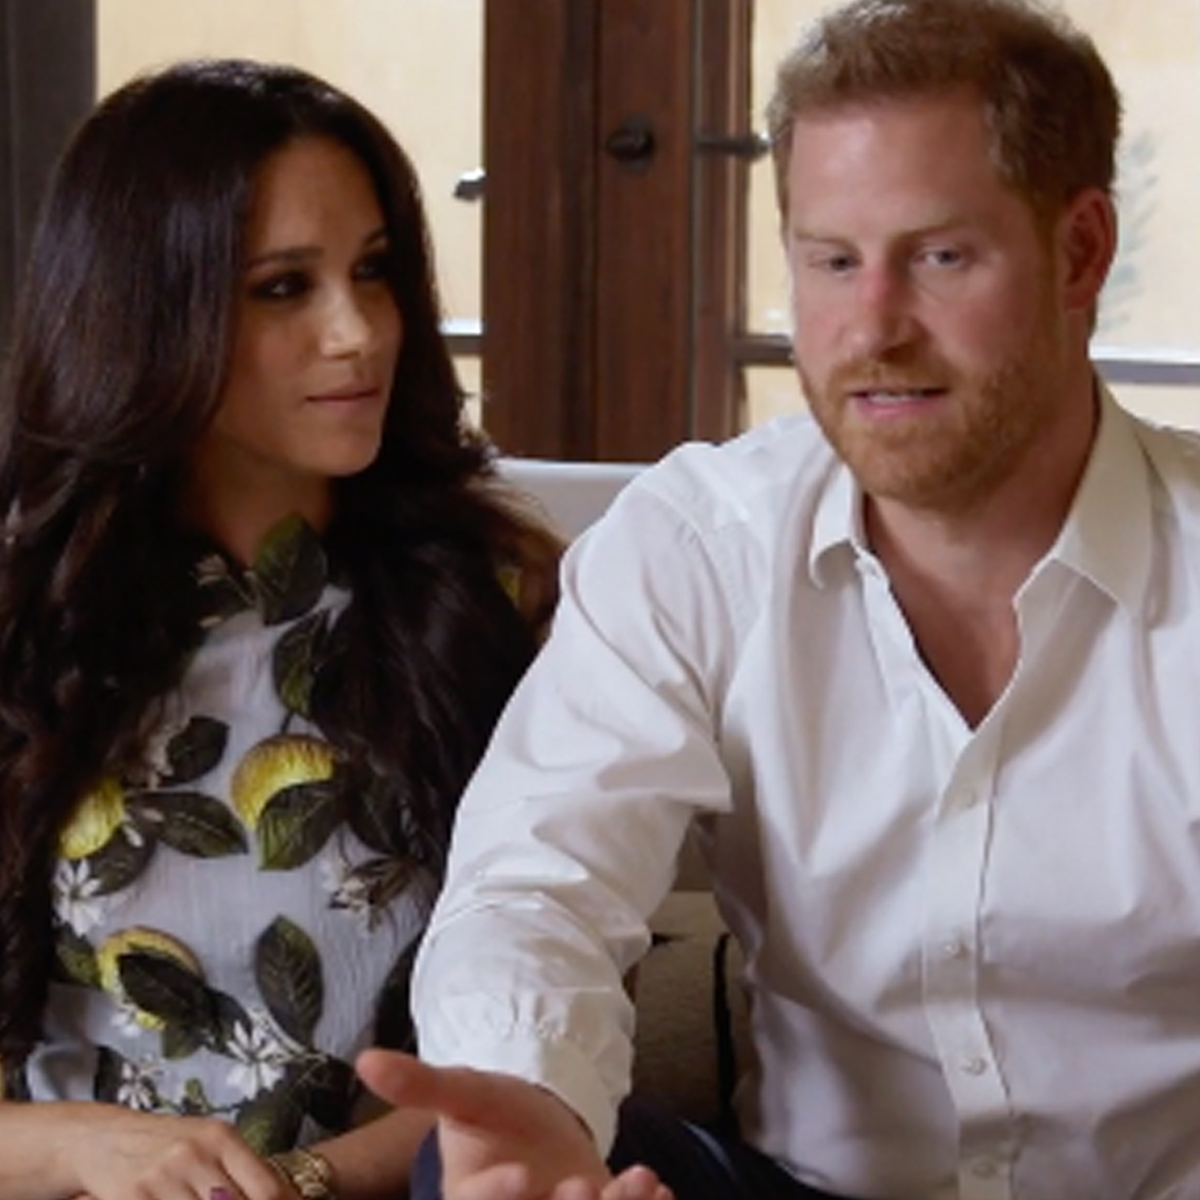 Fans think Meghan Markle suggested the baby’s sex with this